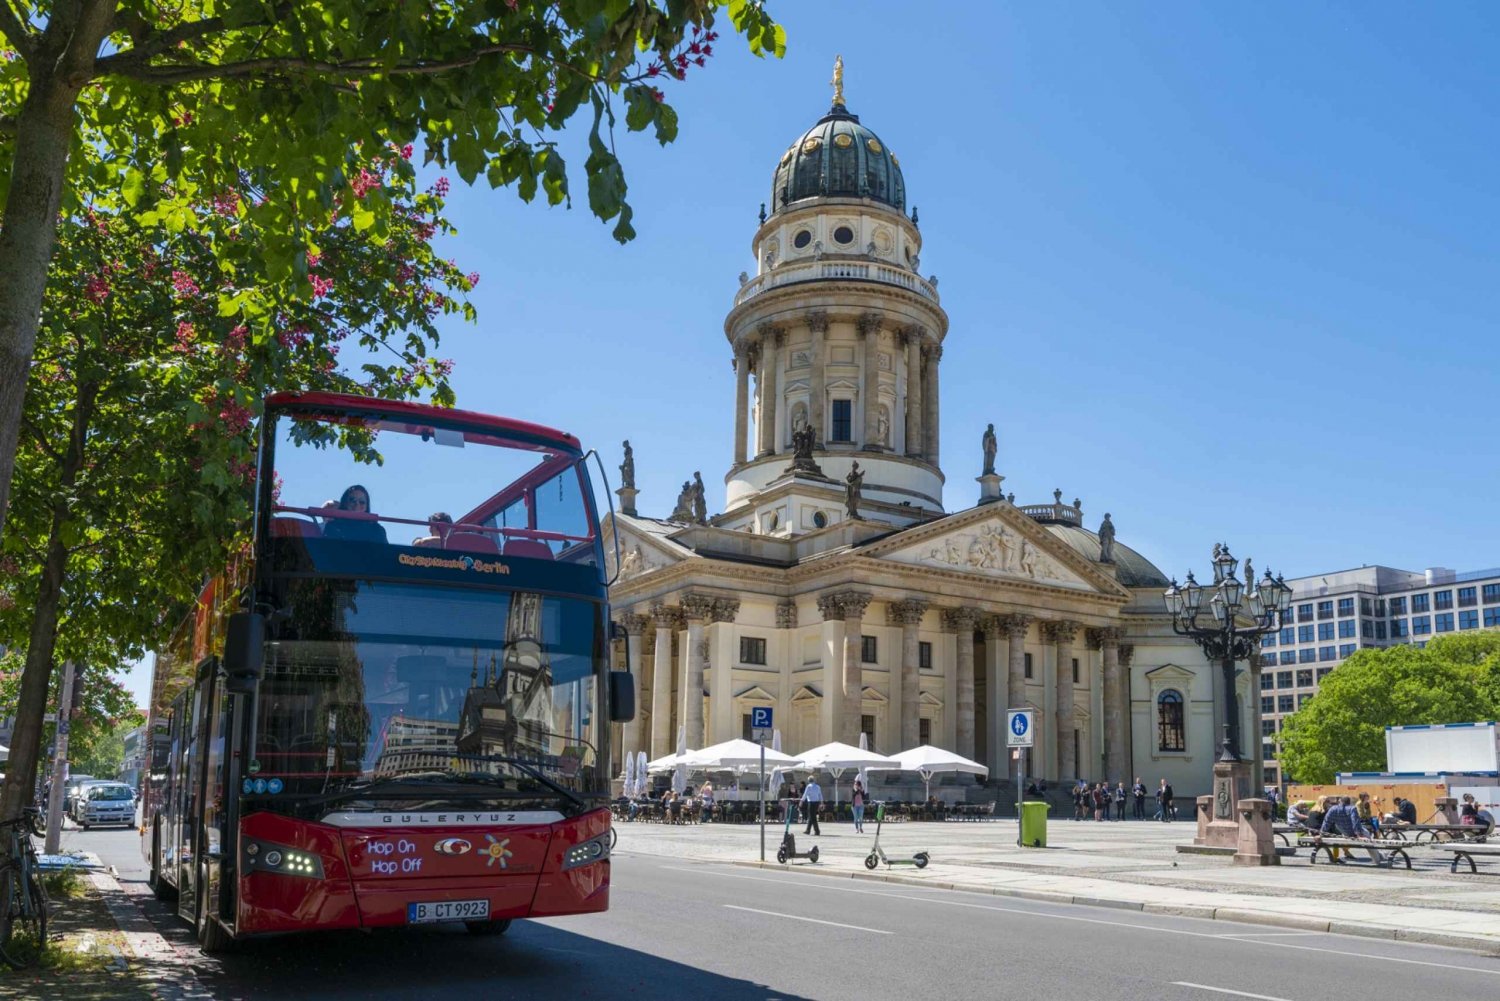 Berlin: Hop-On-Hop-Off Bus with Boat Cruise Option